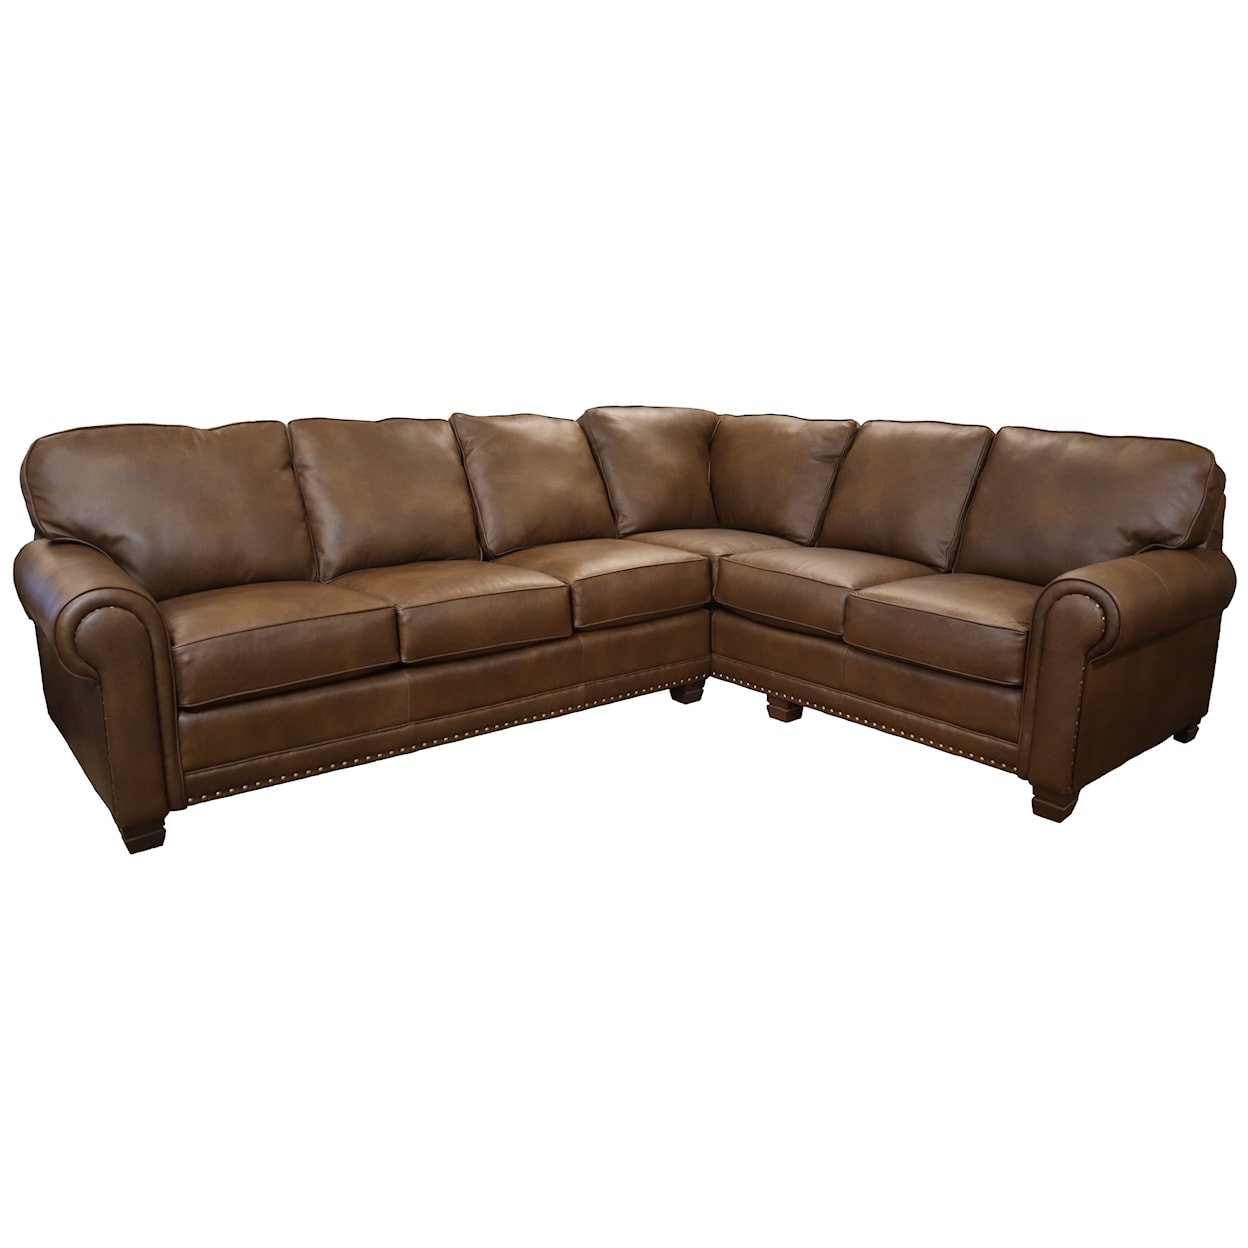 Smith Brothers 393 Sectional Sofa